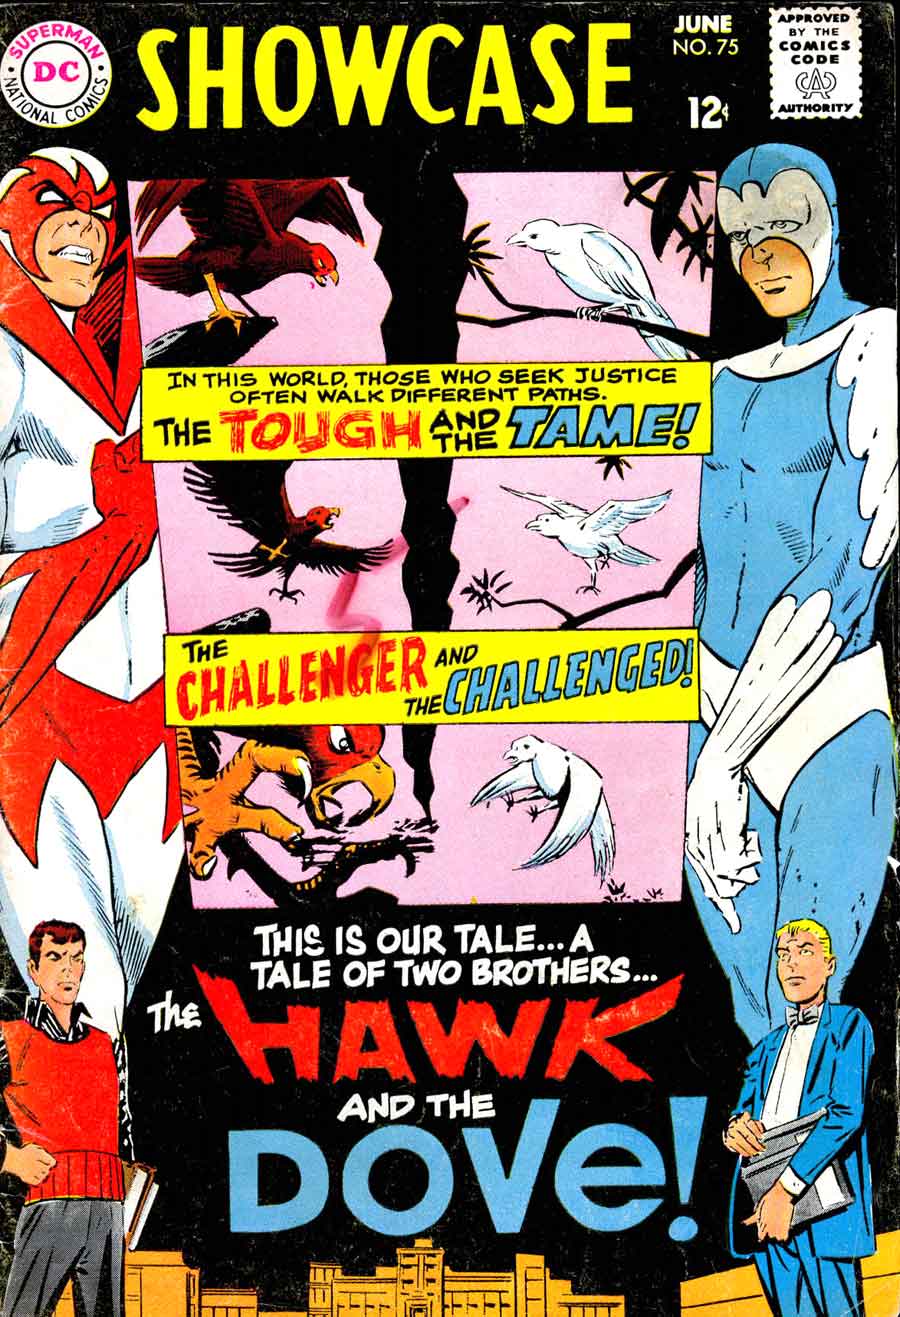 Showcase v1 #75 Hawk and the Dove dc comic book cover art by Steve Ditko